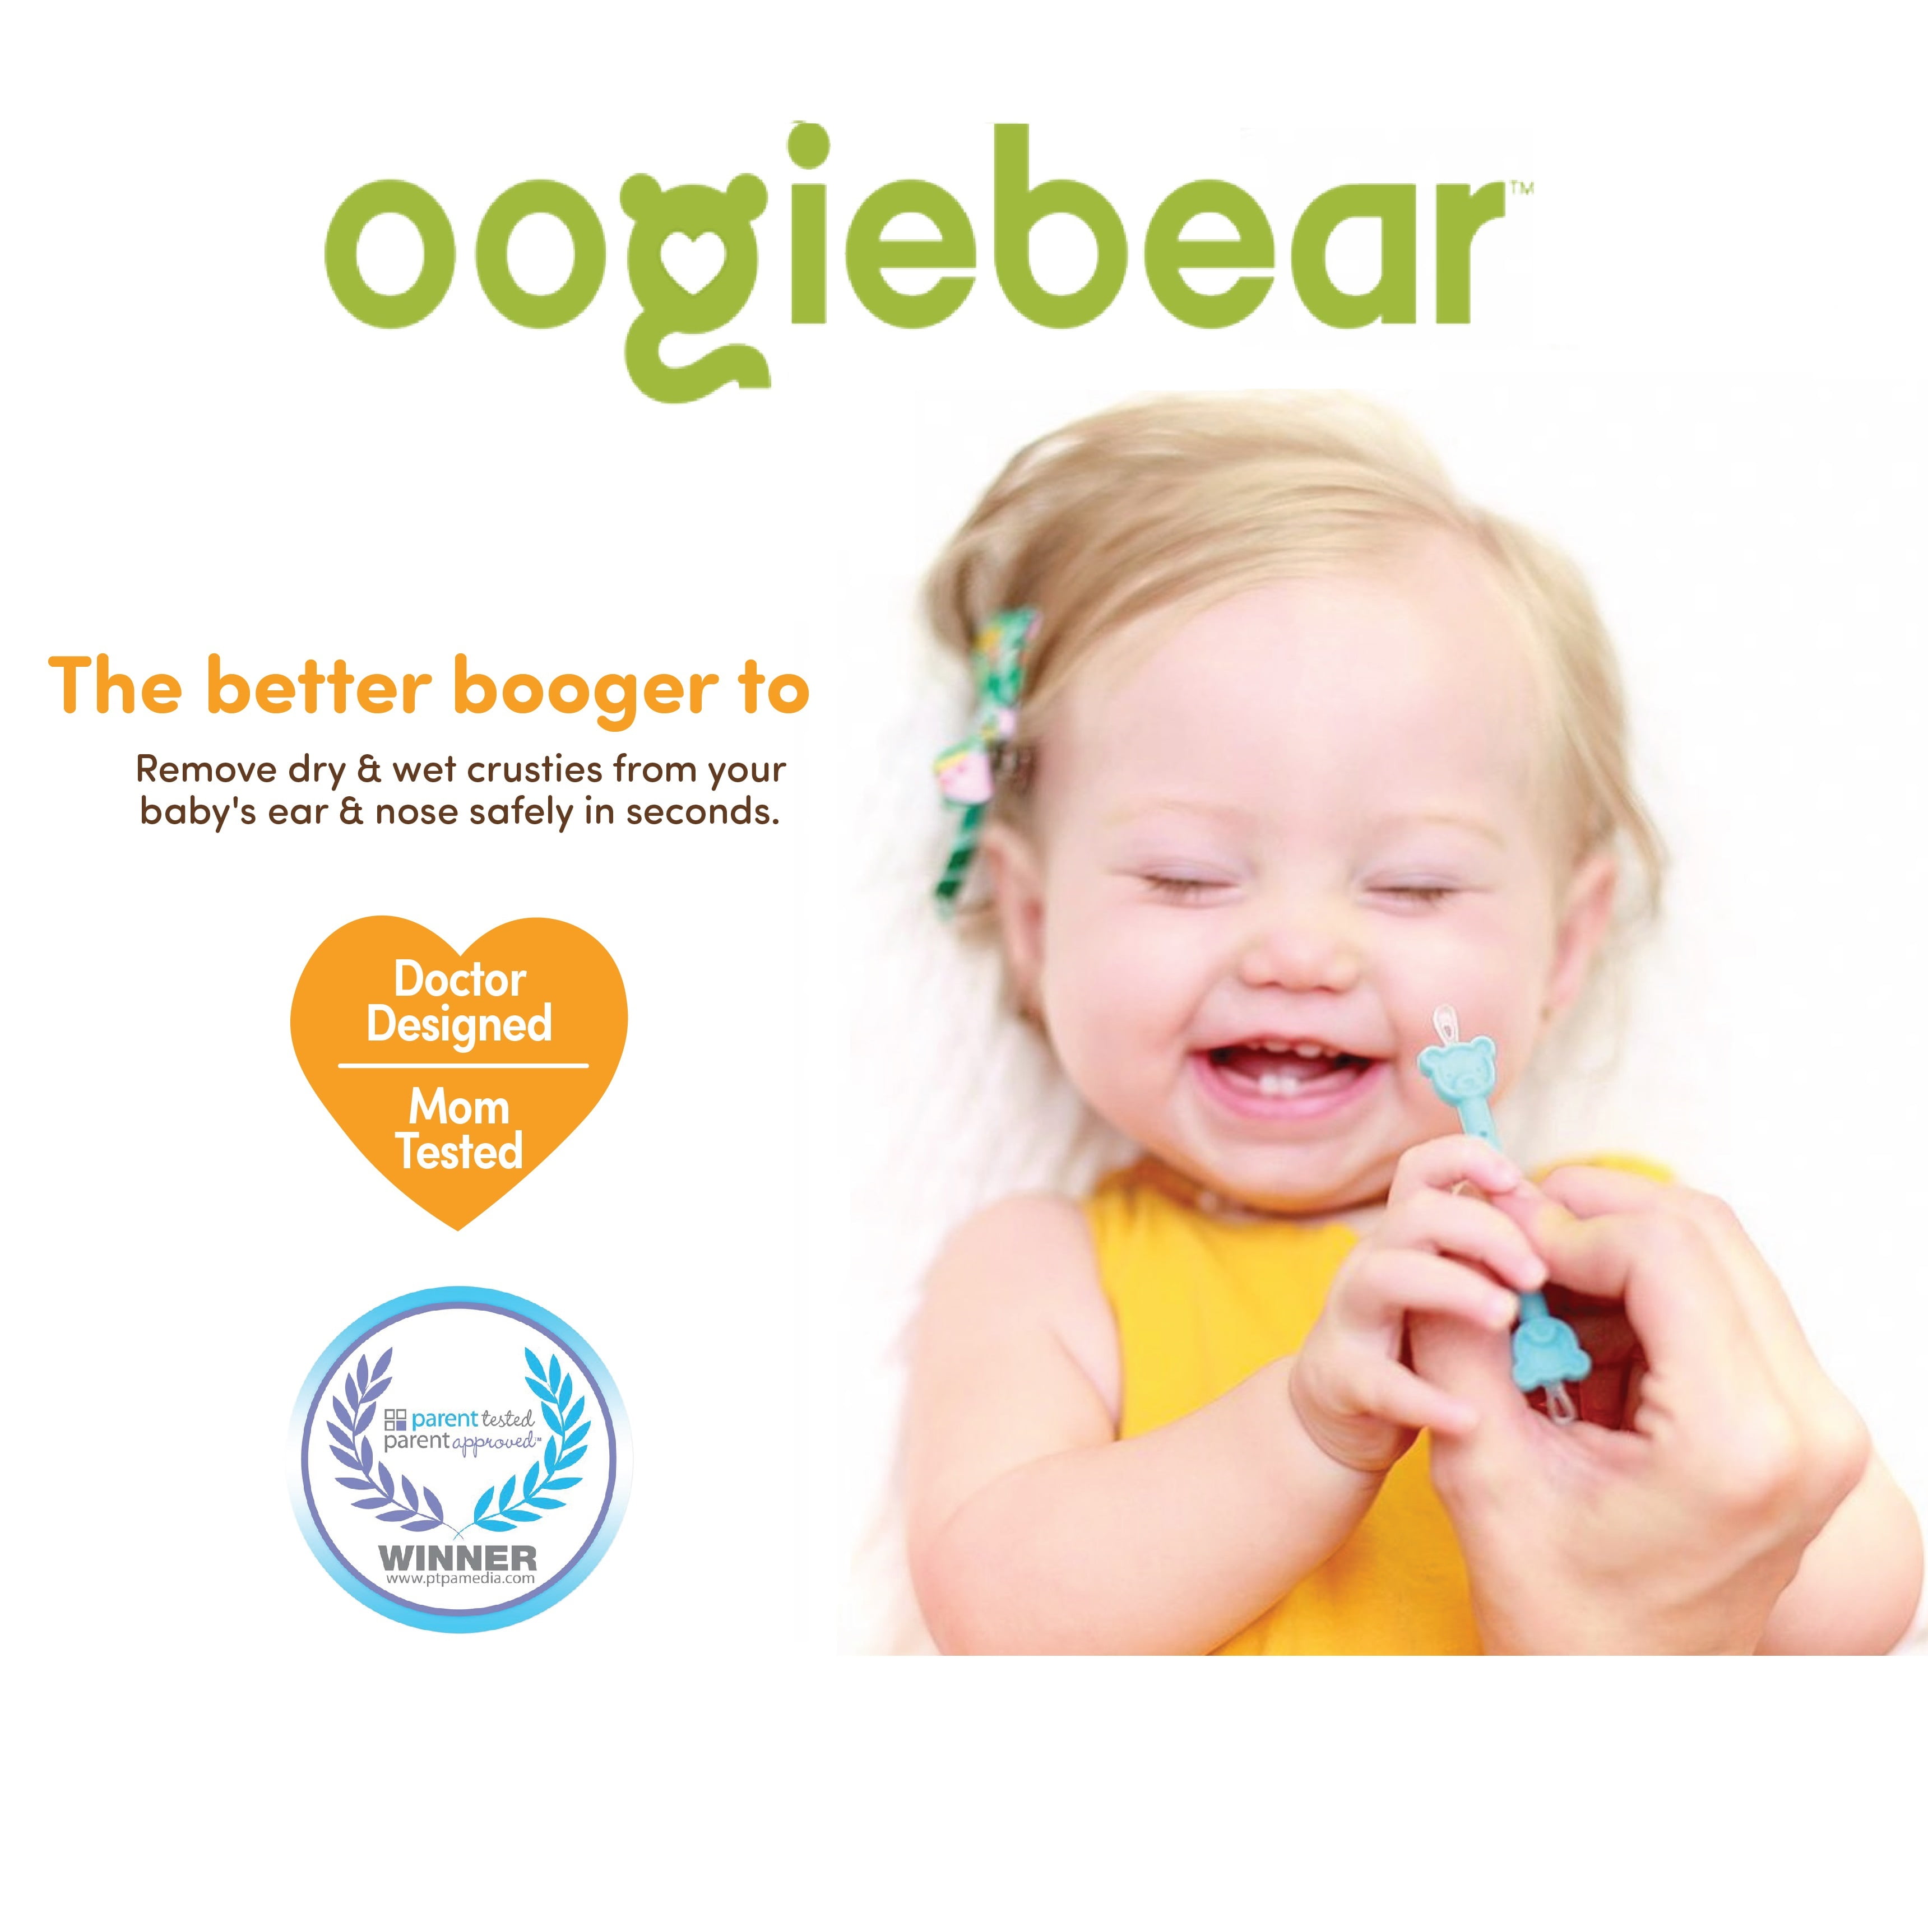 Oogiebear 2 Pack Booger and Ear Wax Picker with Case, Safe For Newborns